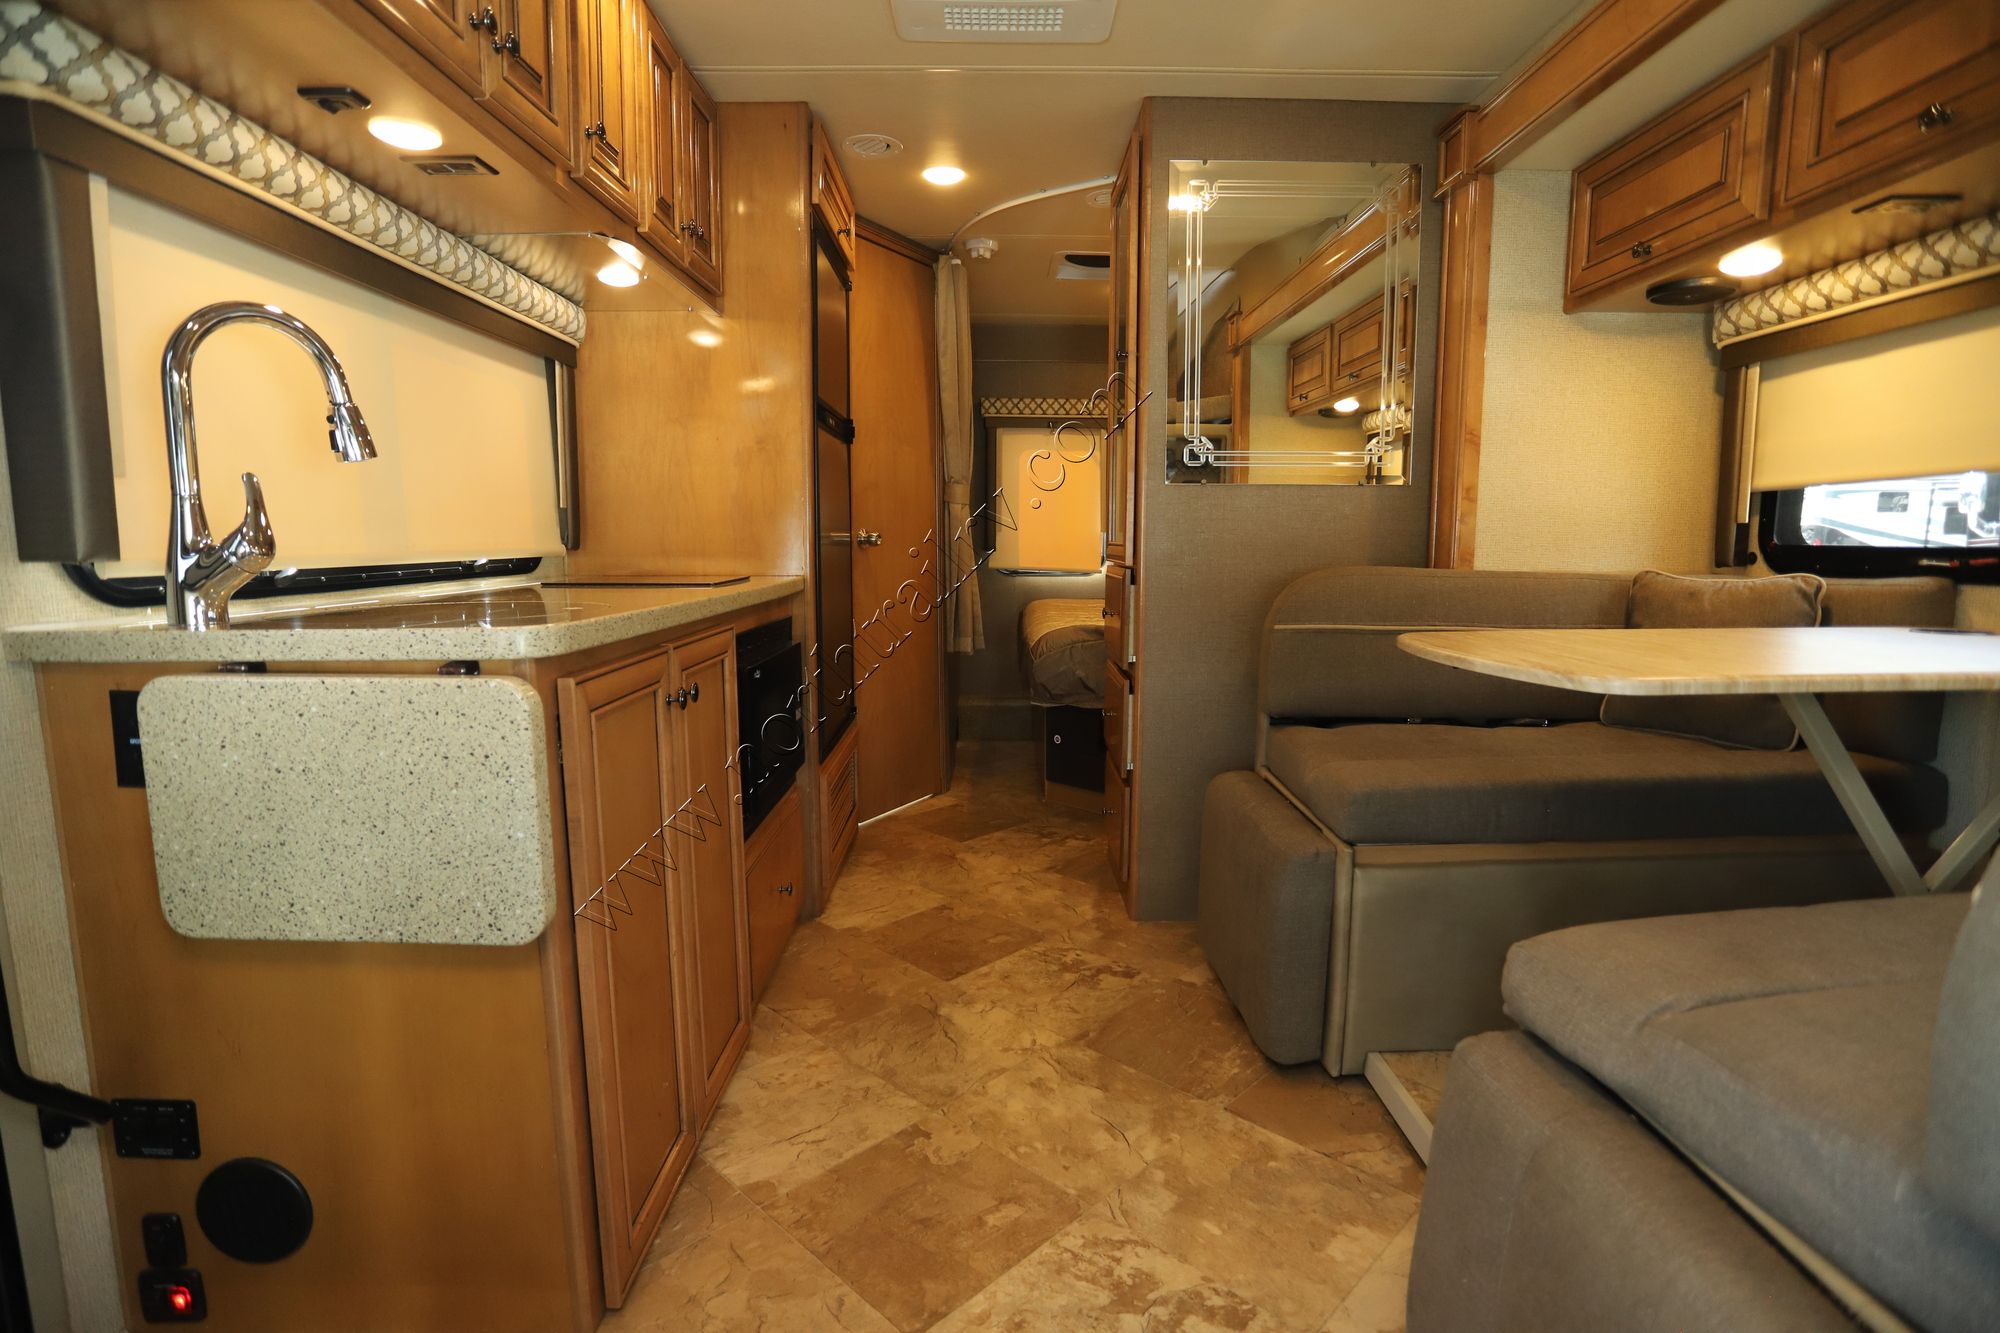 Used 2018 Thor Citation 24SS Class C  For Sale